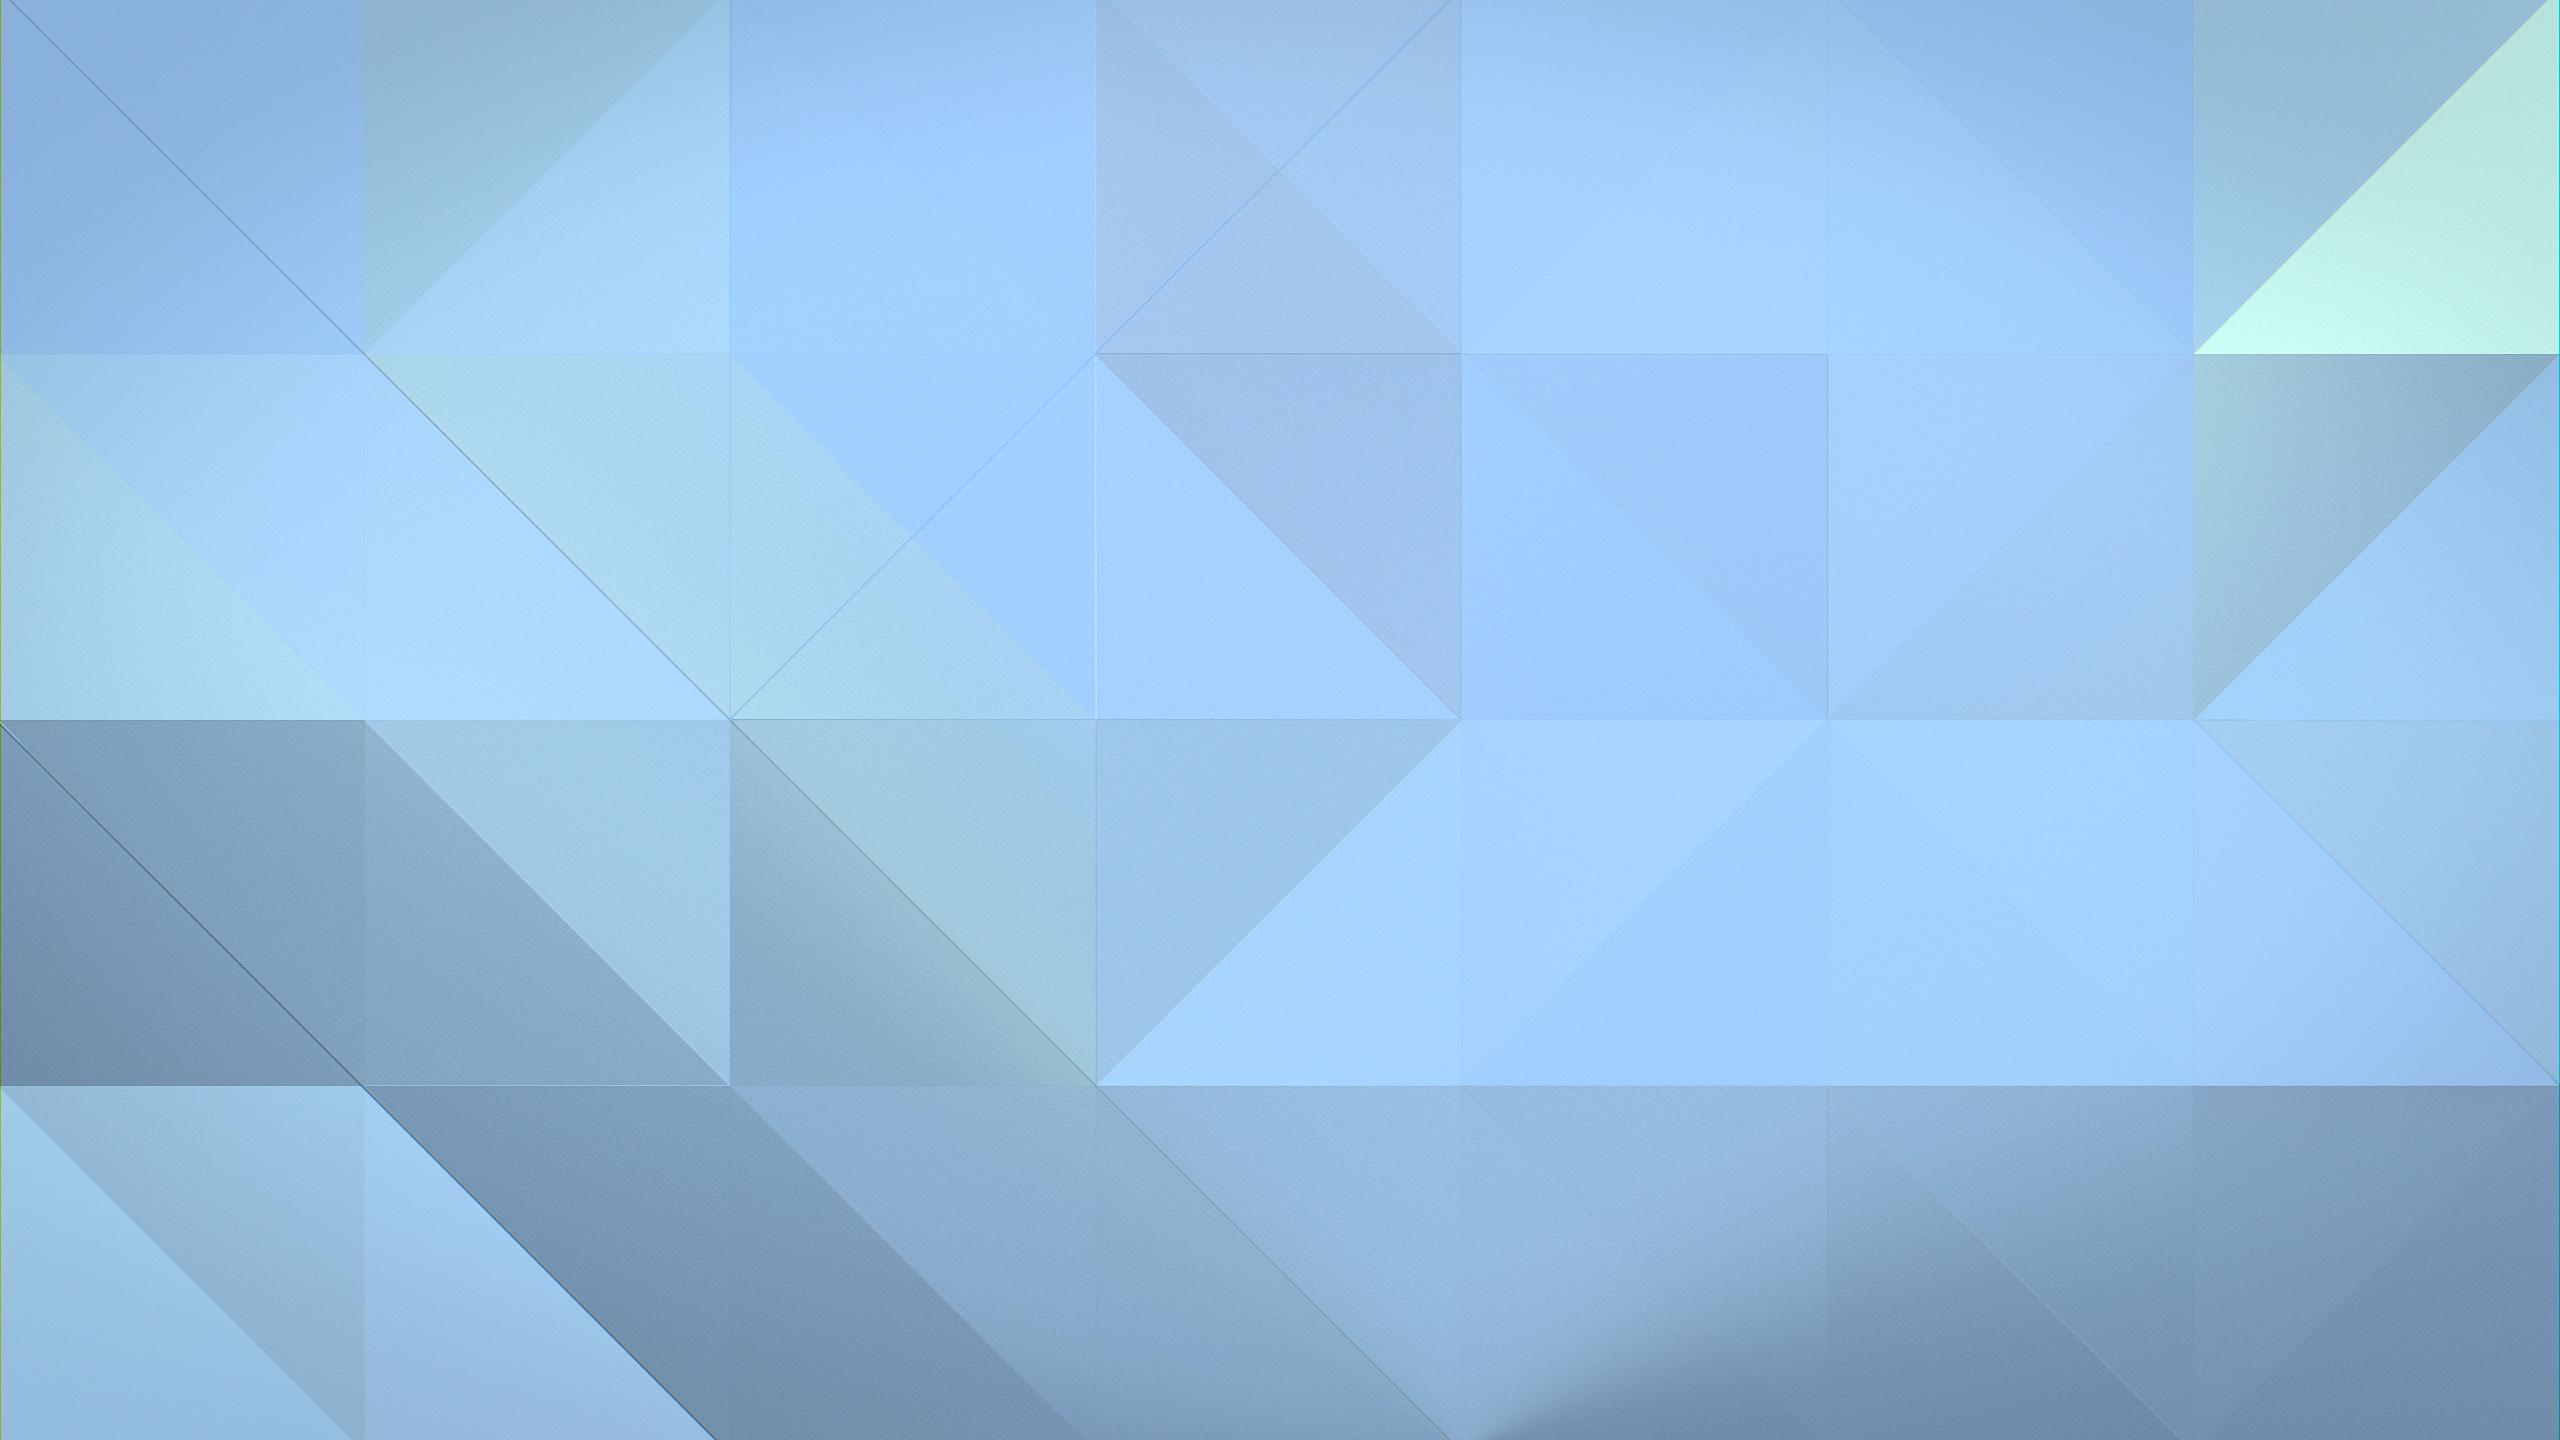 This Is the Default Wallpaper of the GNOME 3.20 Desktop Environment